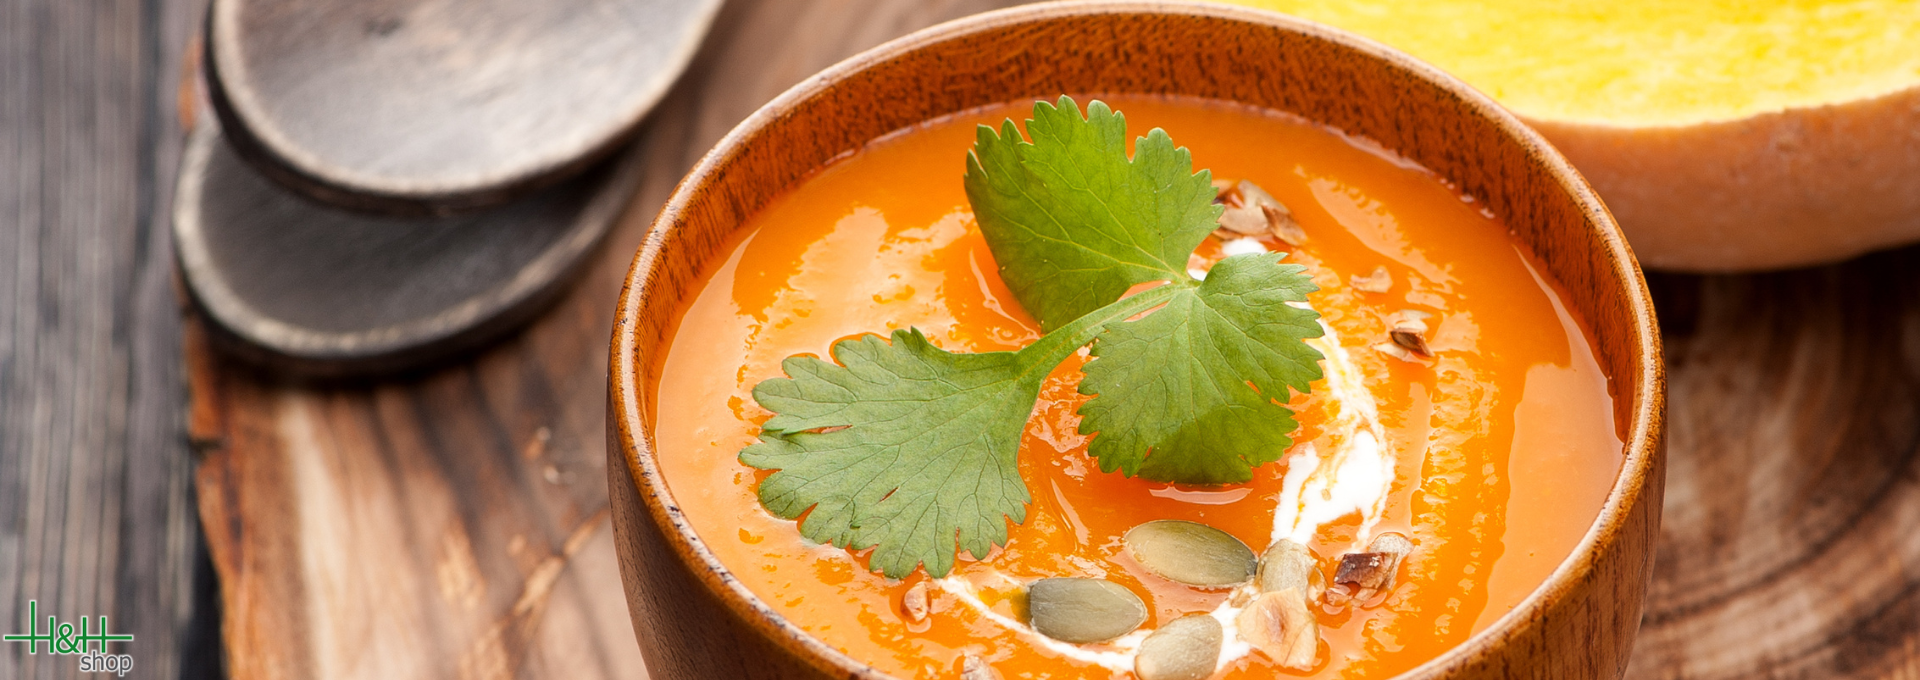 Spicy pumpkin soup - At home in South Tyrol